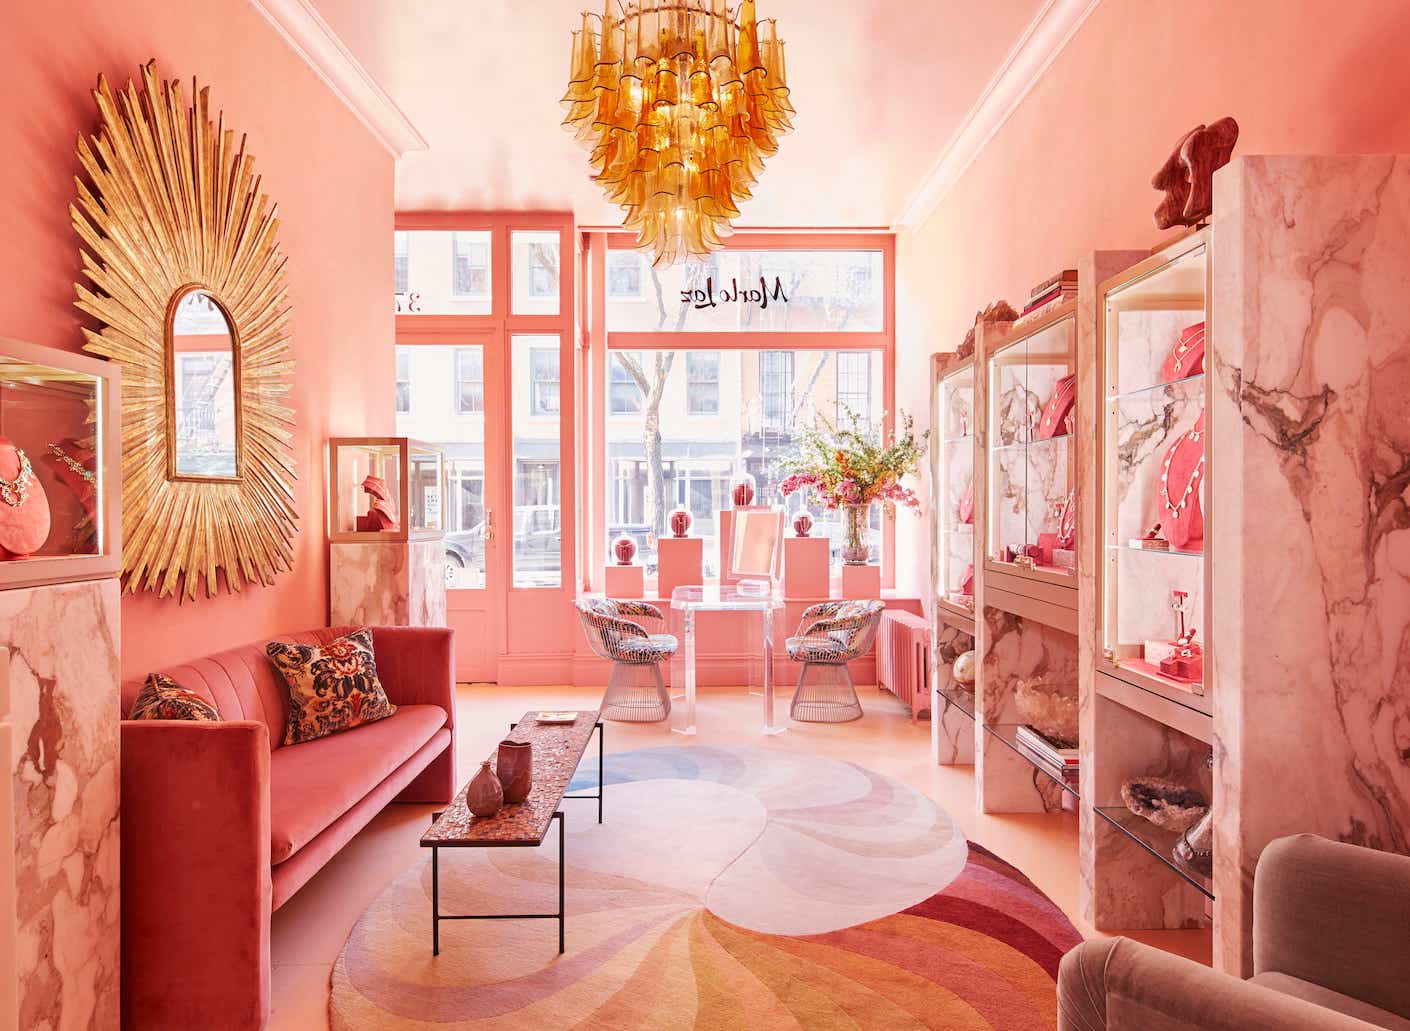 inside the Marlo Laz jewelry store with pink and gold designs